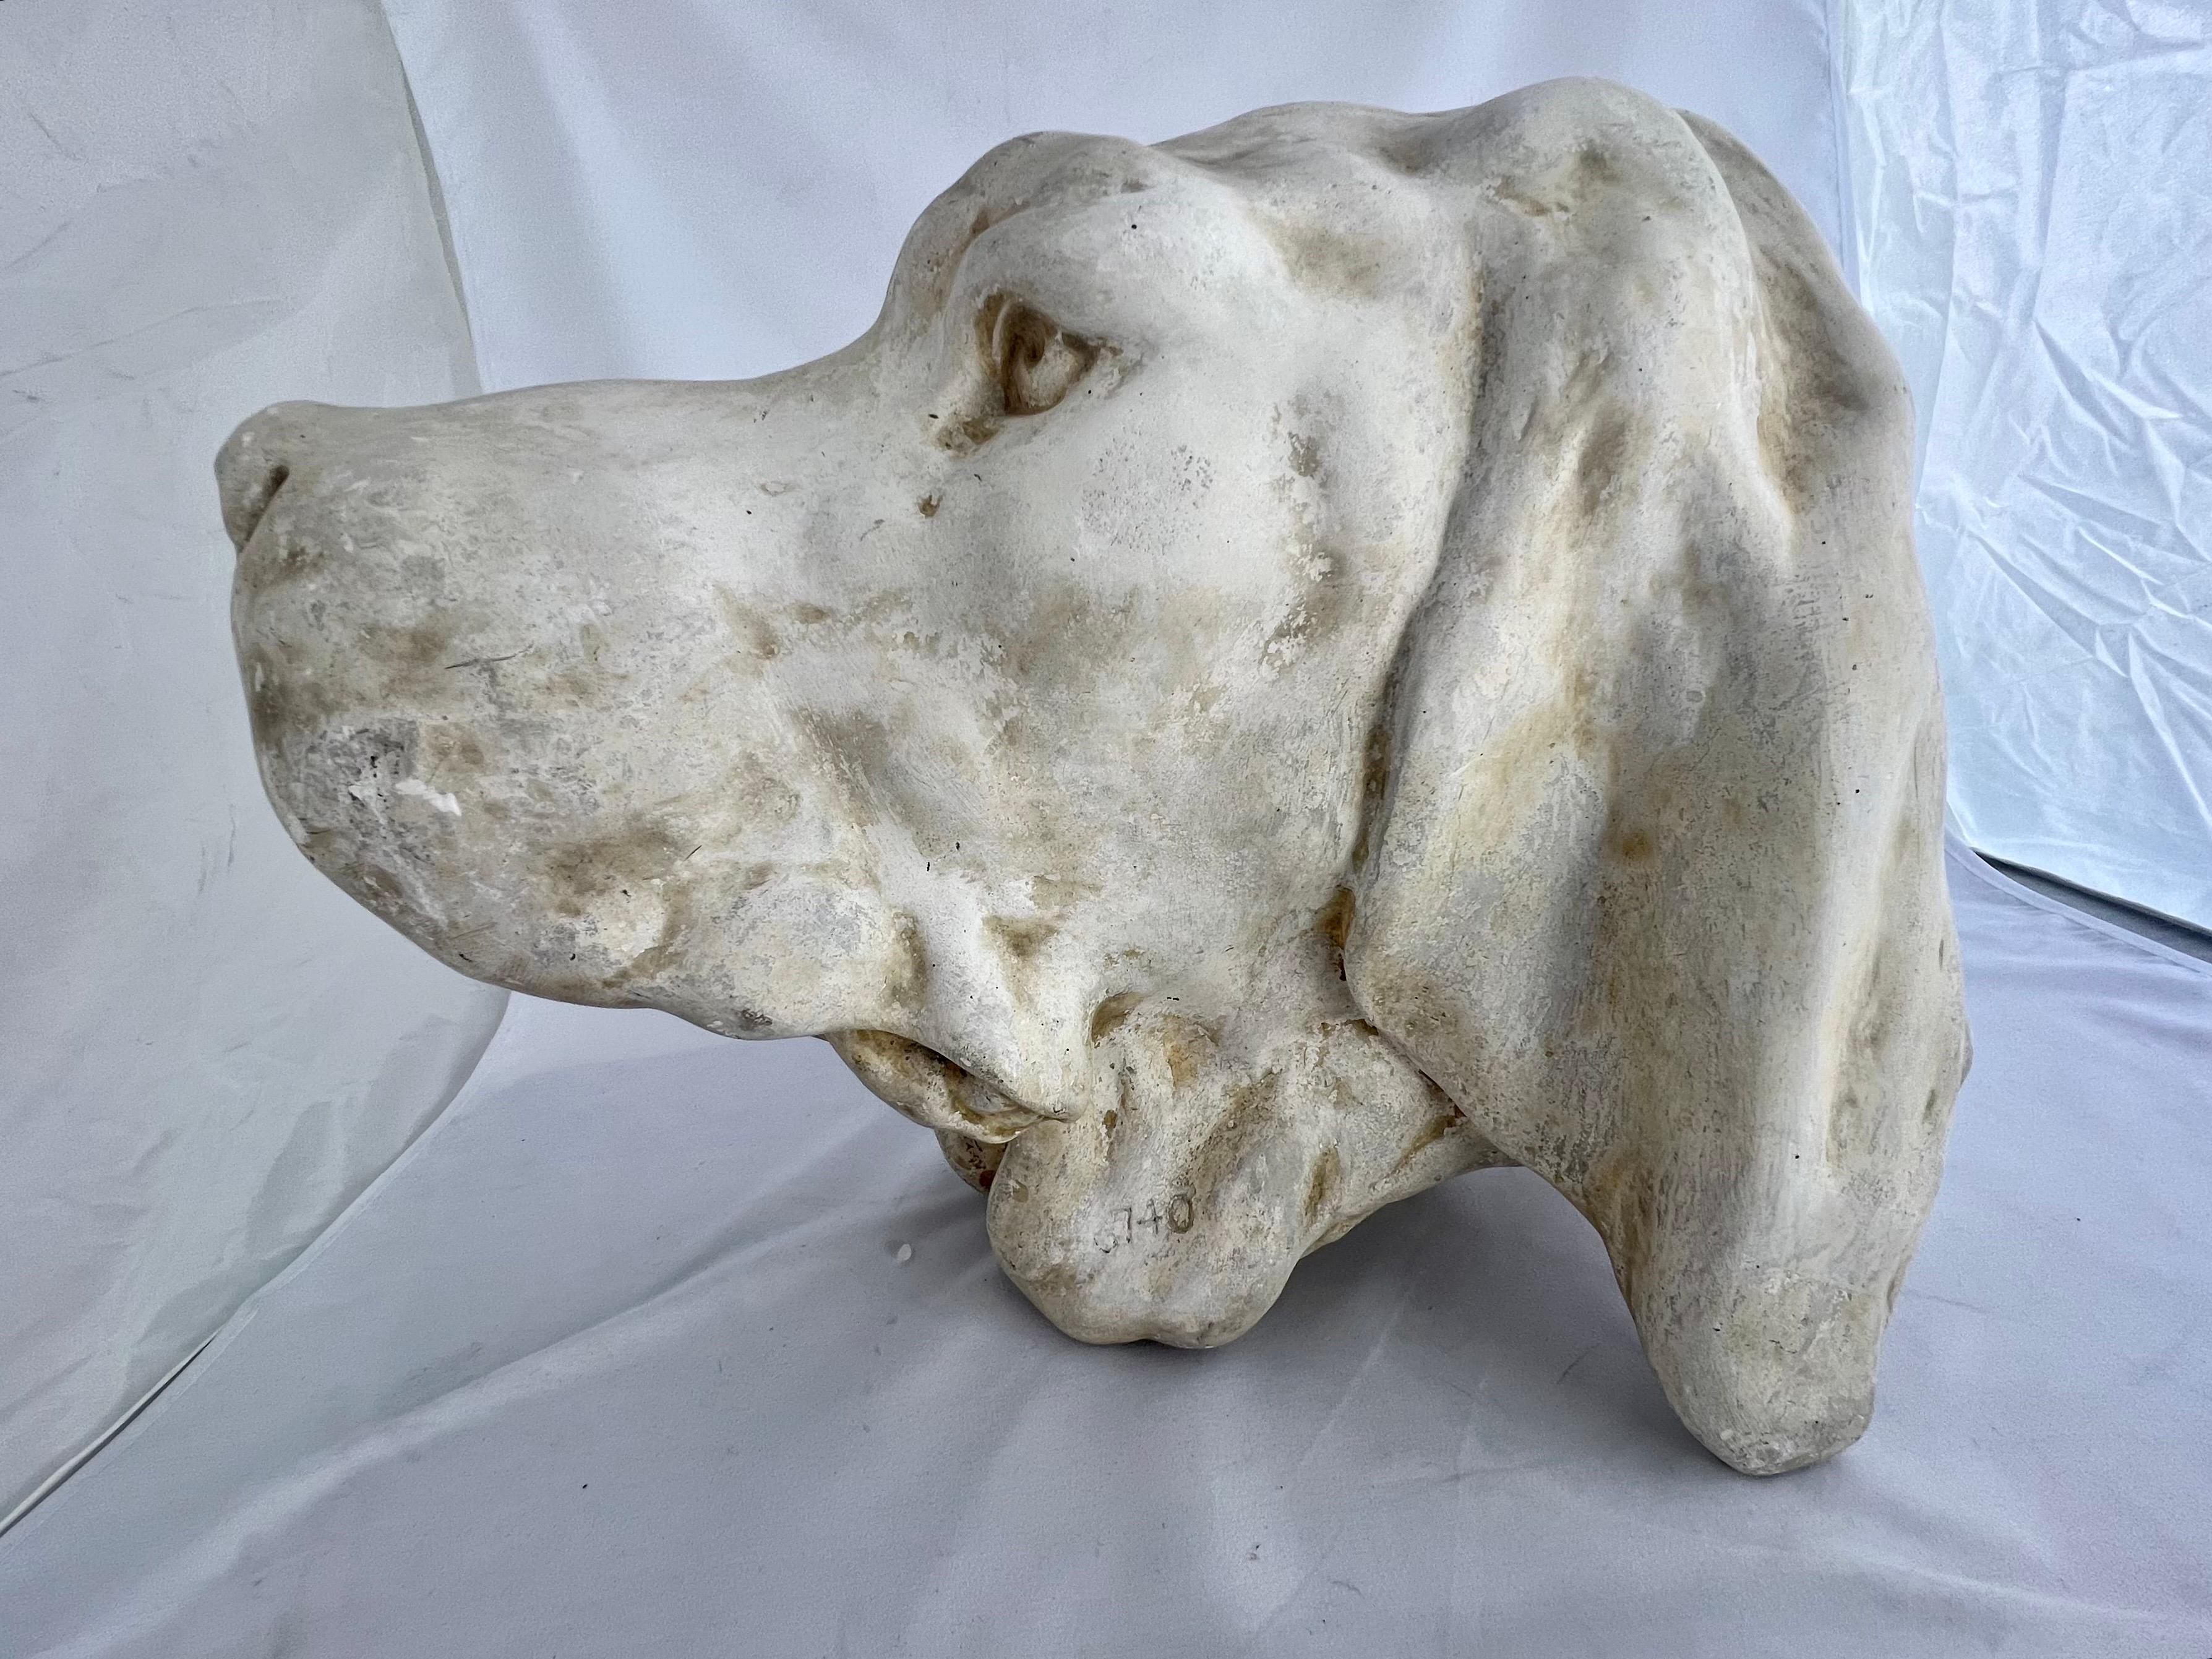 A plaster casting of a Pointer dog by the Caproni Bros. The brass hallmark on the back dates it to the beginning of the 20th century when the company was still young and growing. They made accurate castings from pieces they found in Europe and made